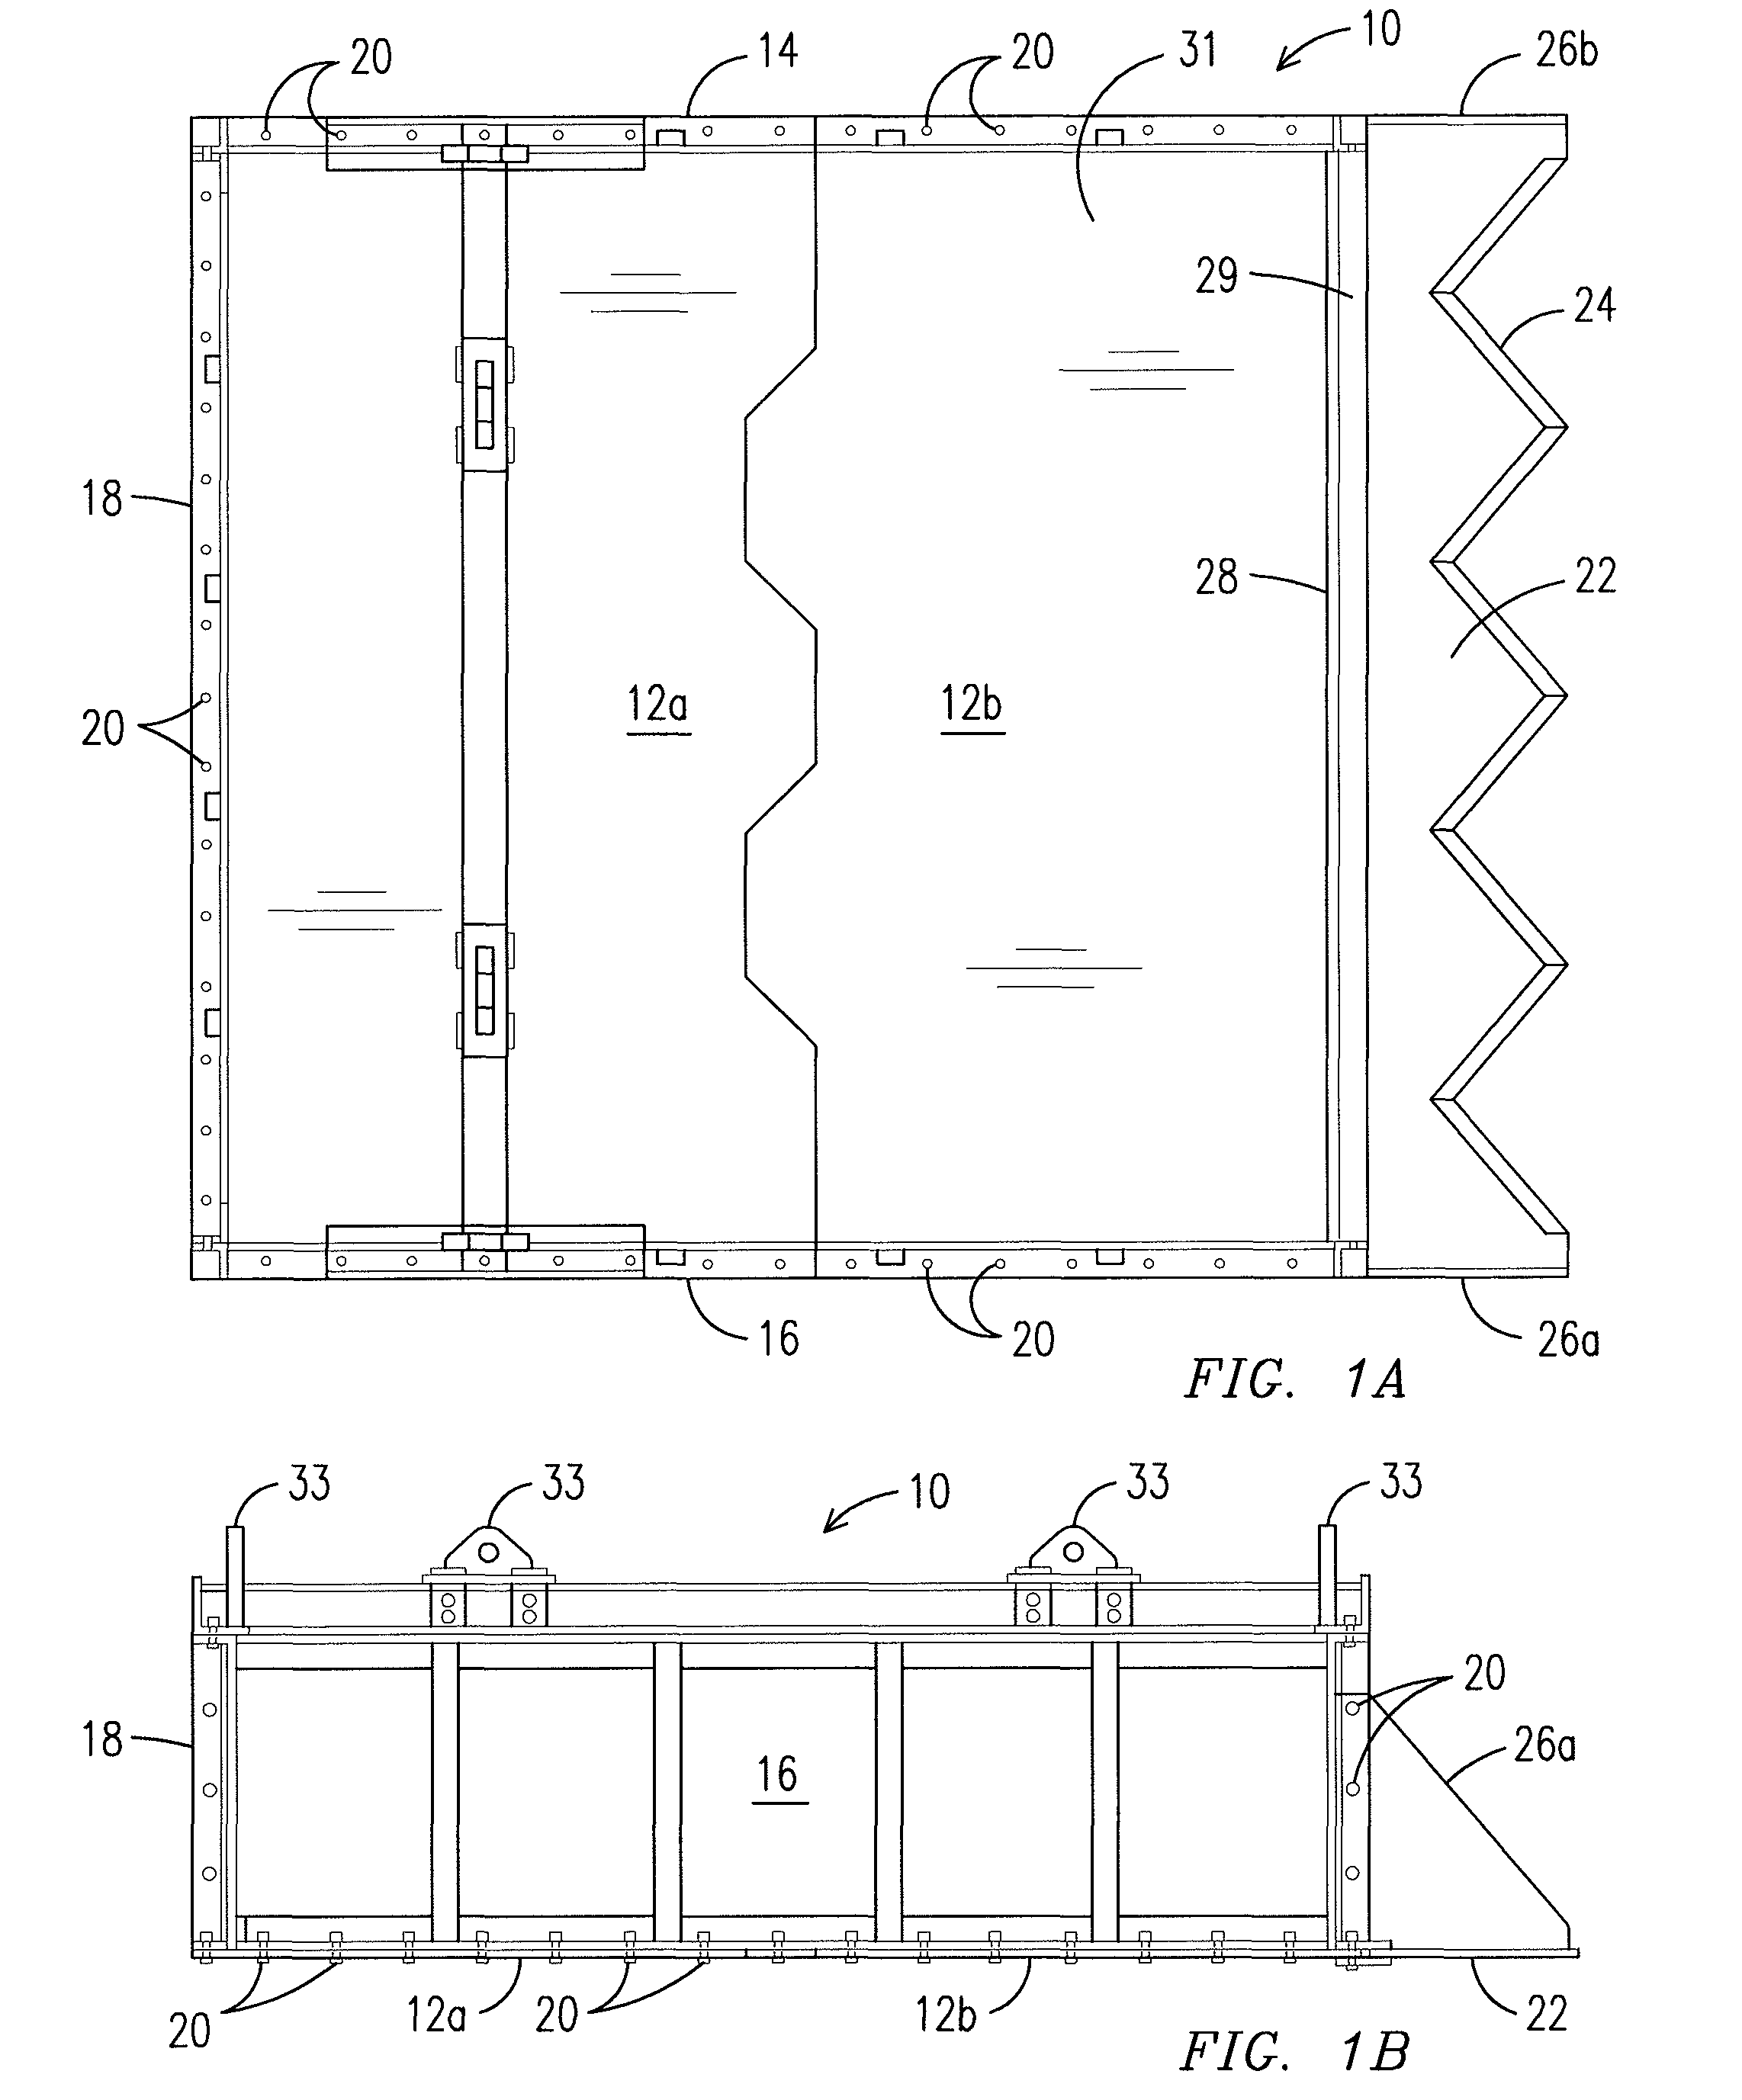 Method and system for transplanting large trees